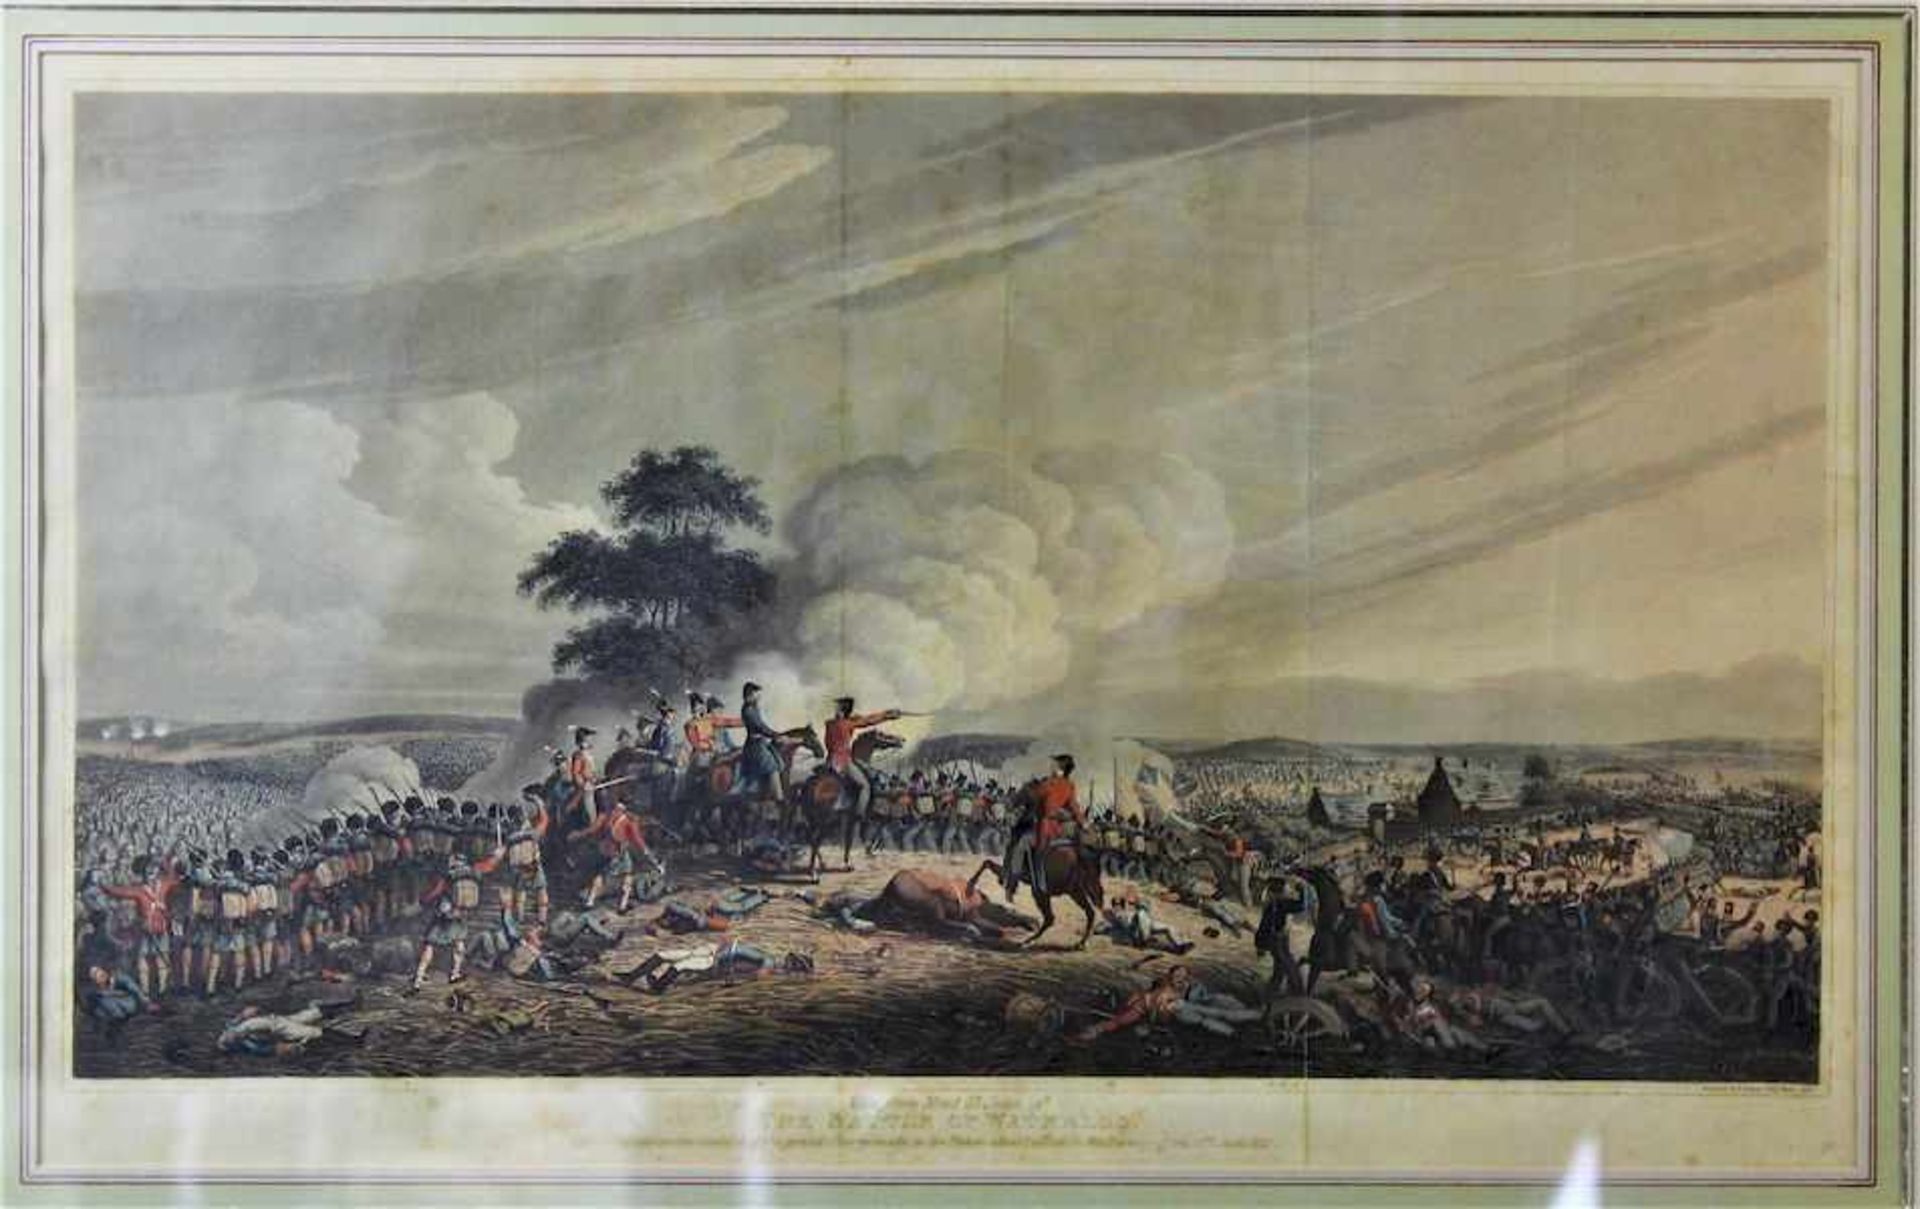 Bowyer, Robert " View from Mont St. Jean of the Battle of Waterloo "Aquatinta Radierung auf Papier